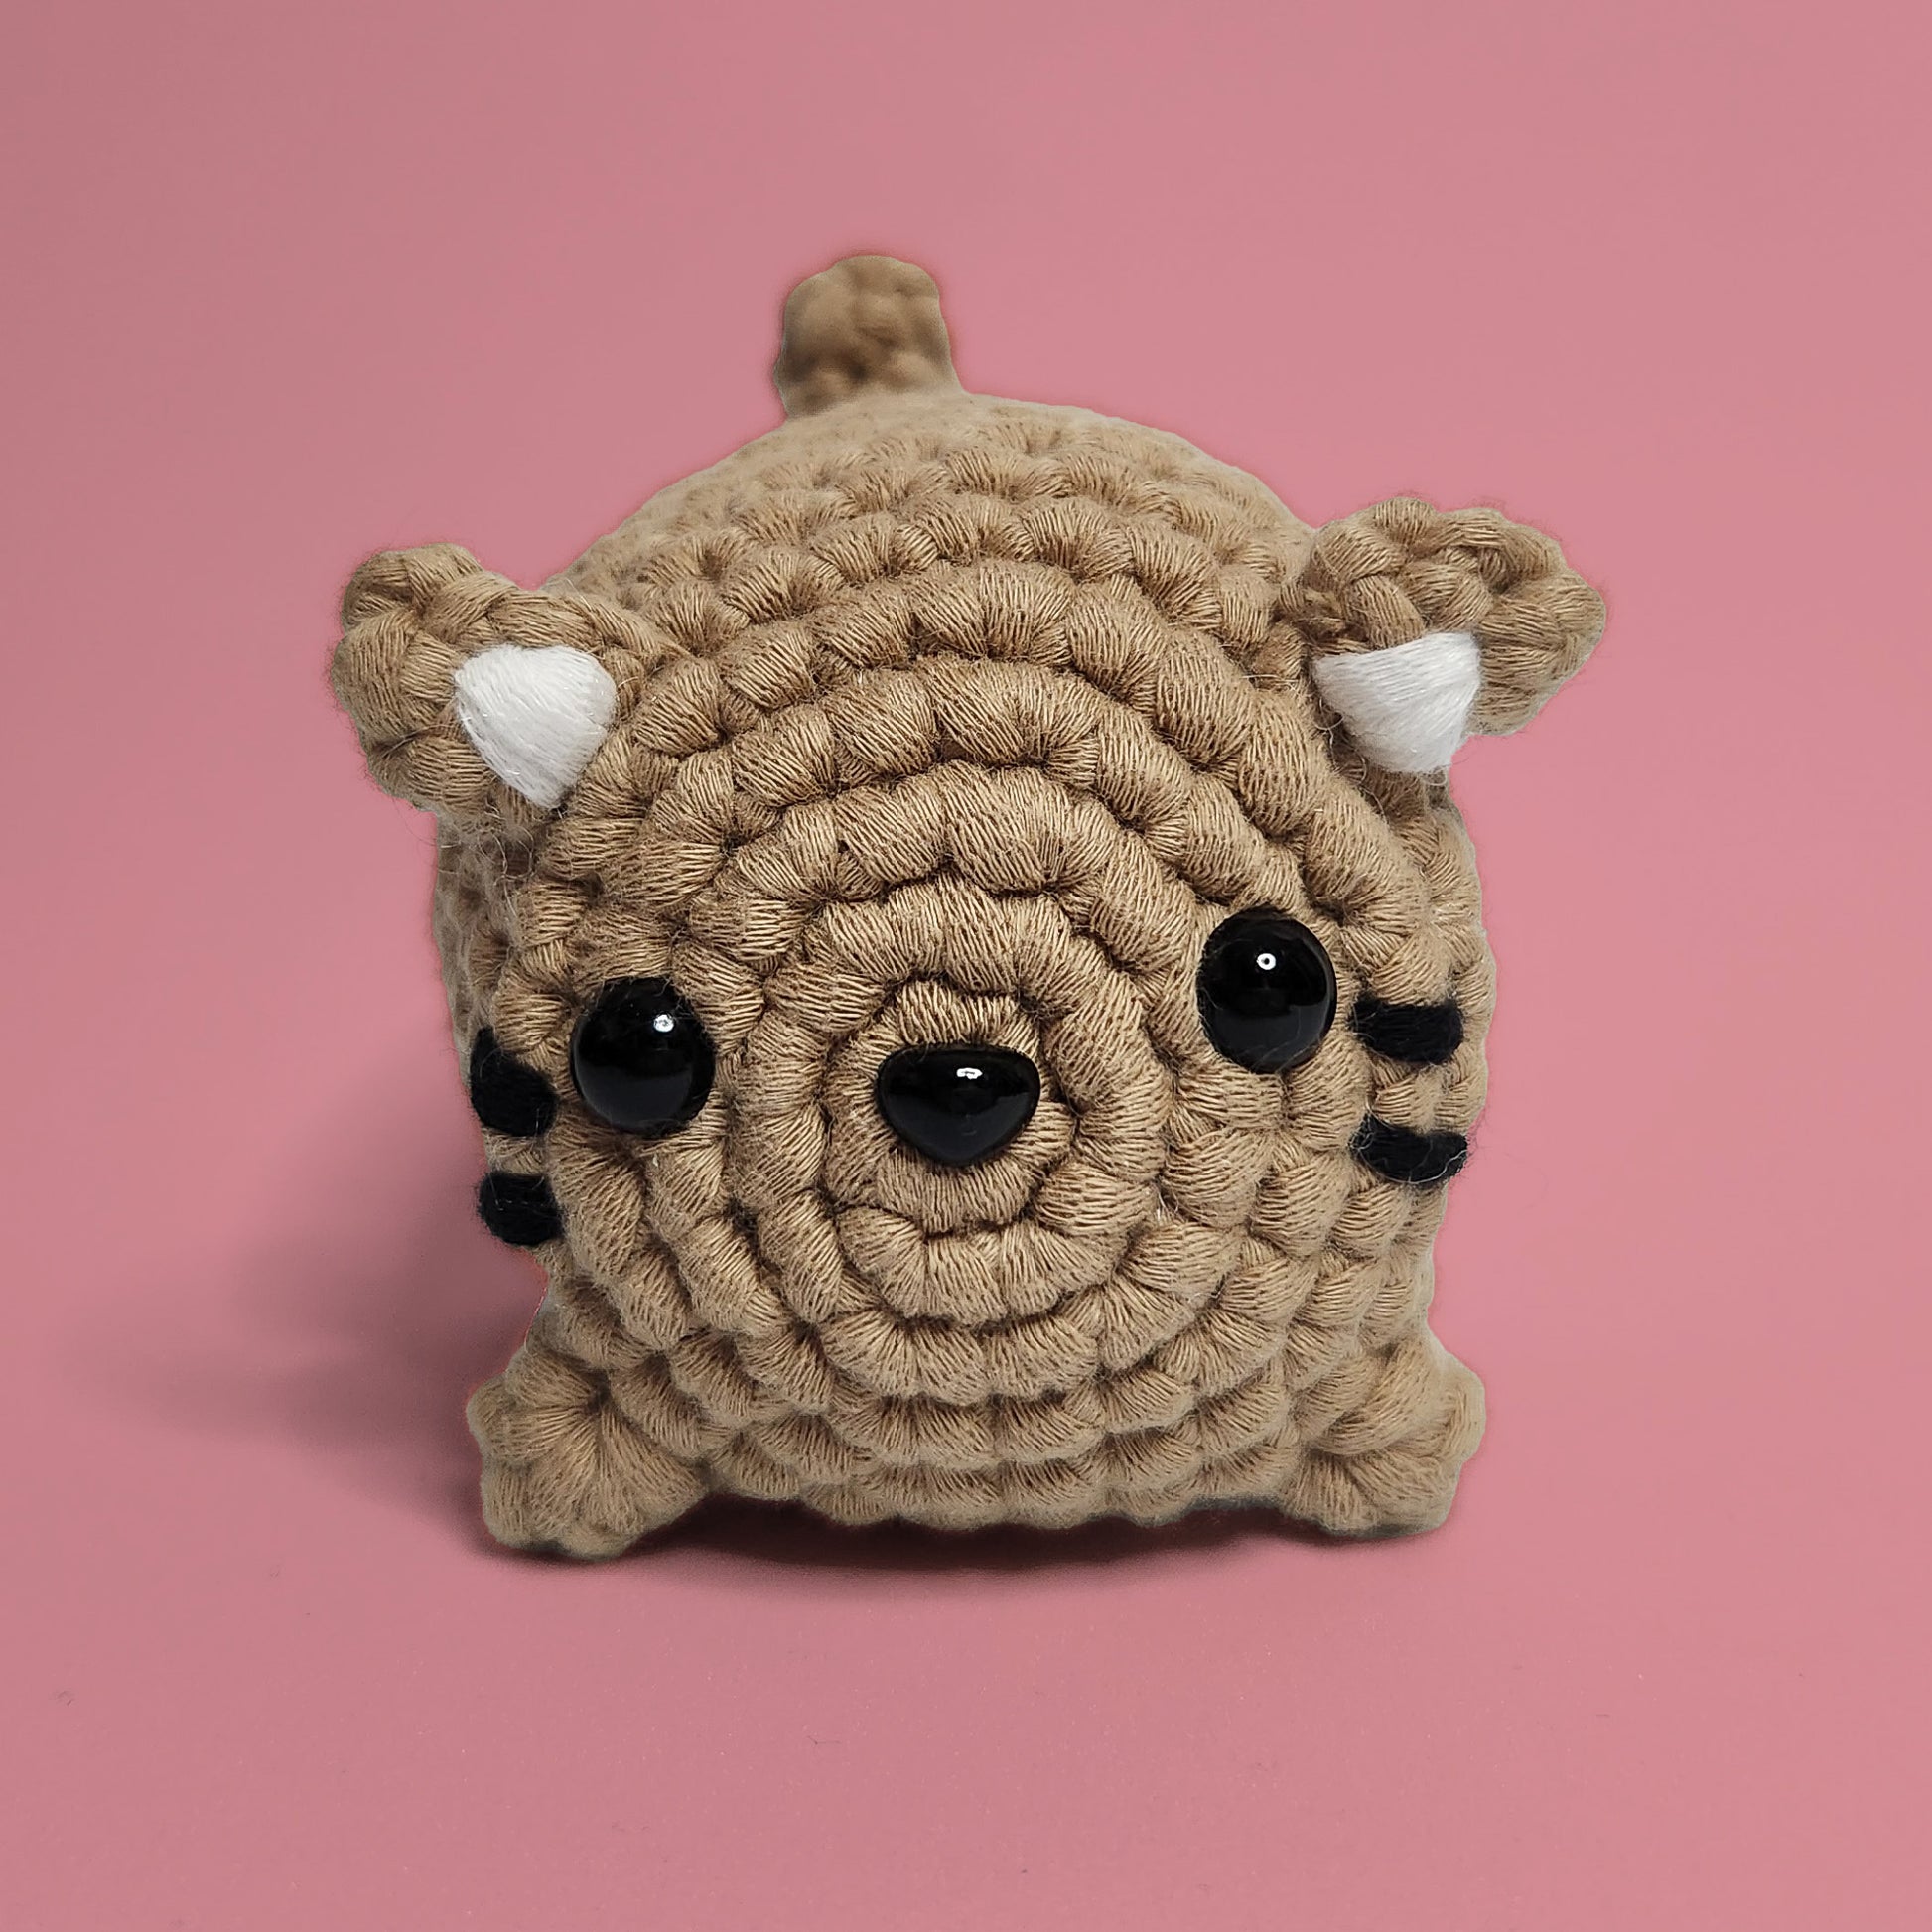 Brown cat crochet amigurumi with whiskers and ears. Handcrafted with care, this charming cat is a purr-fect project for cat lovers and crochet enthusiasts. Front view.